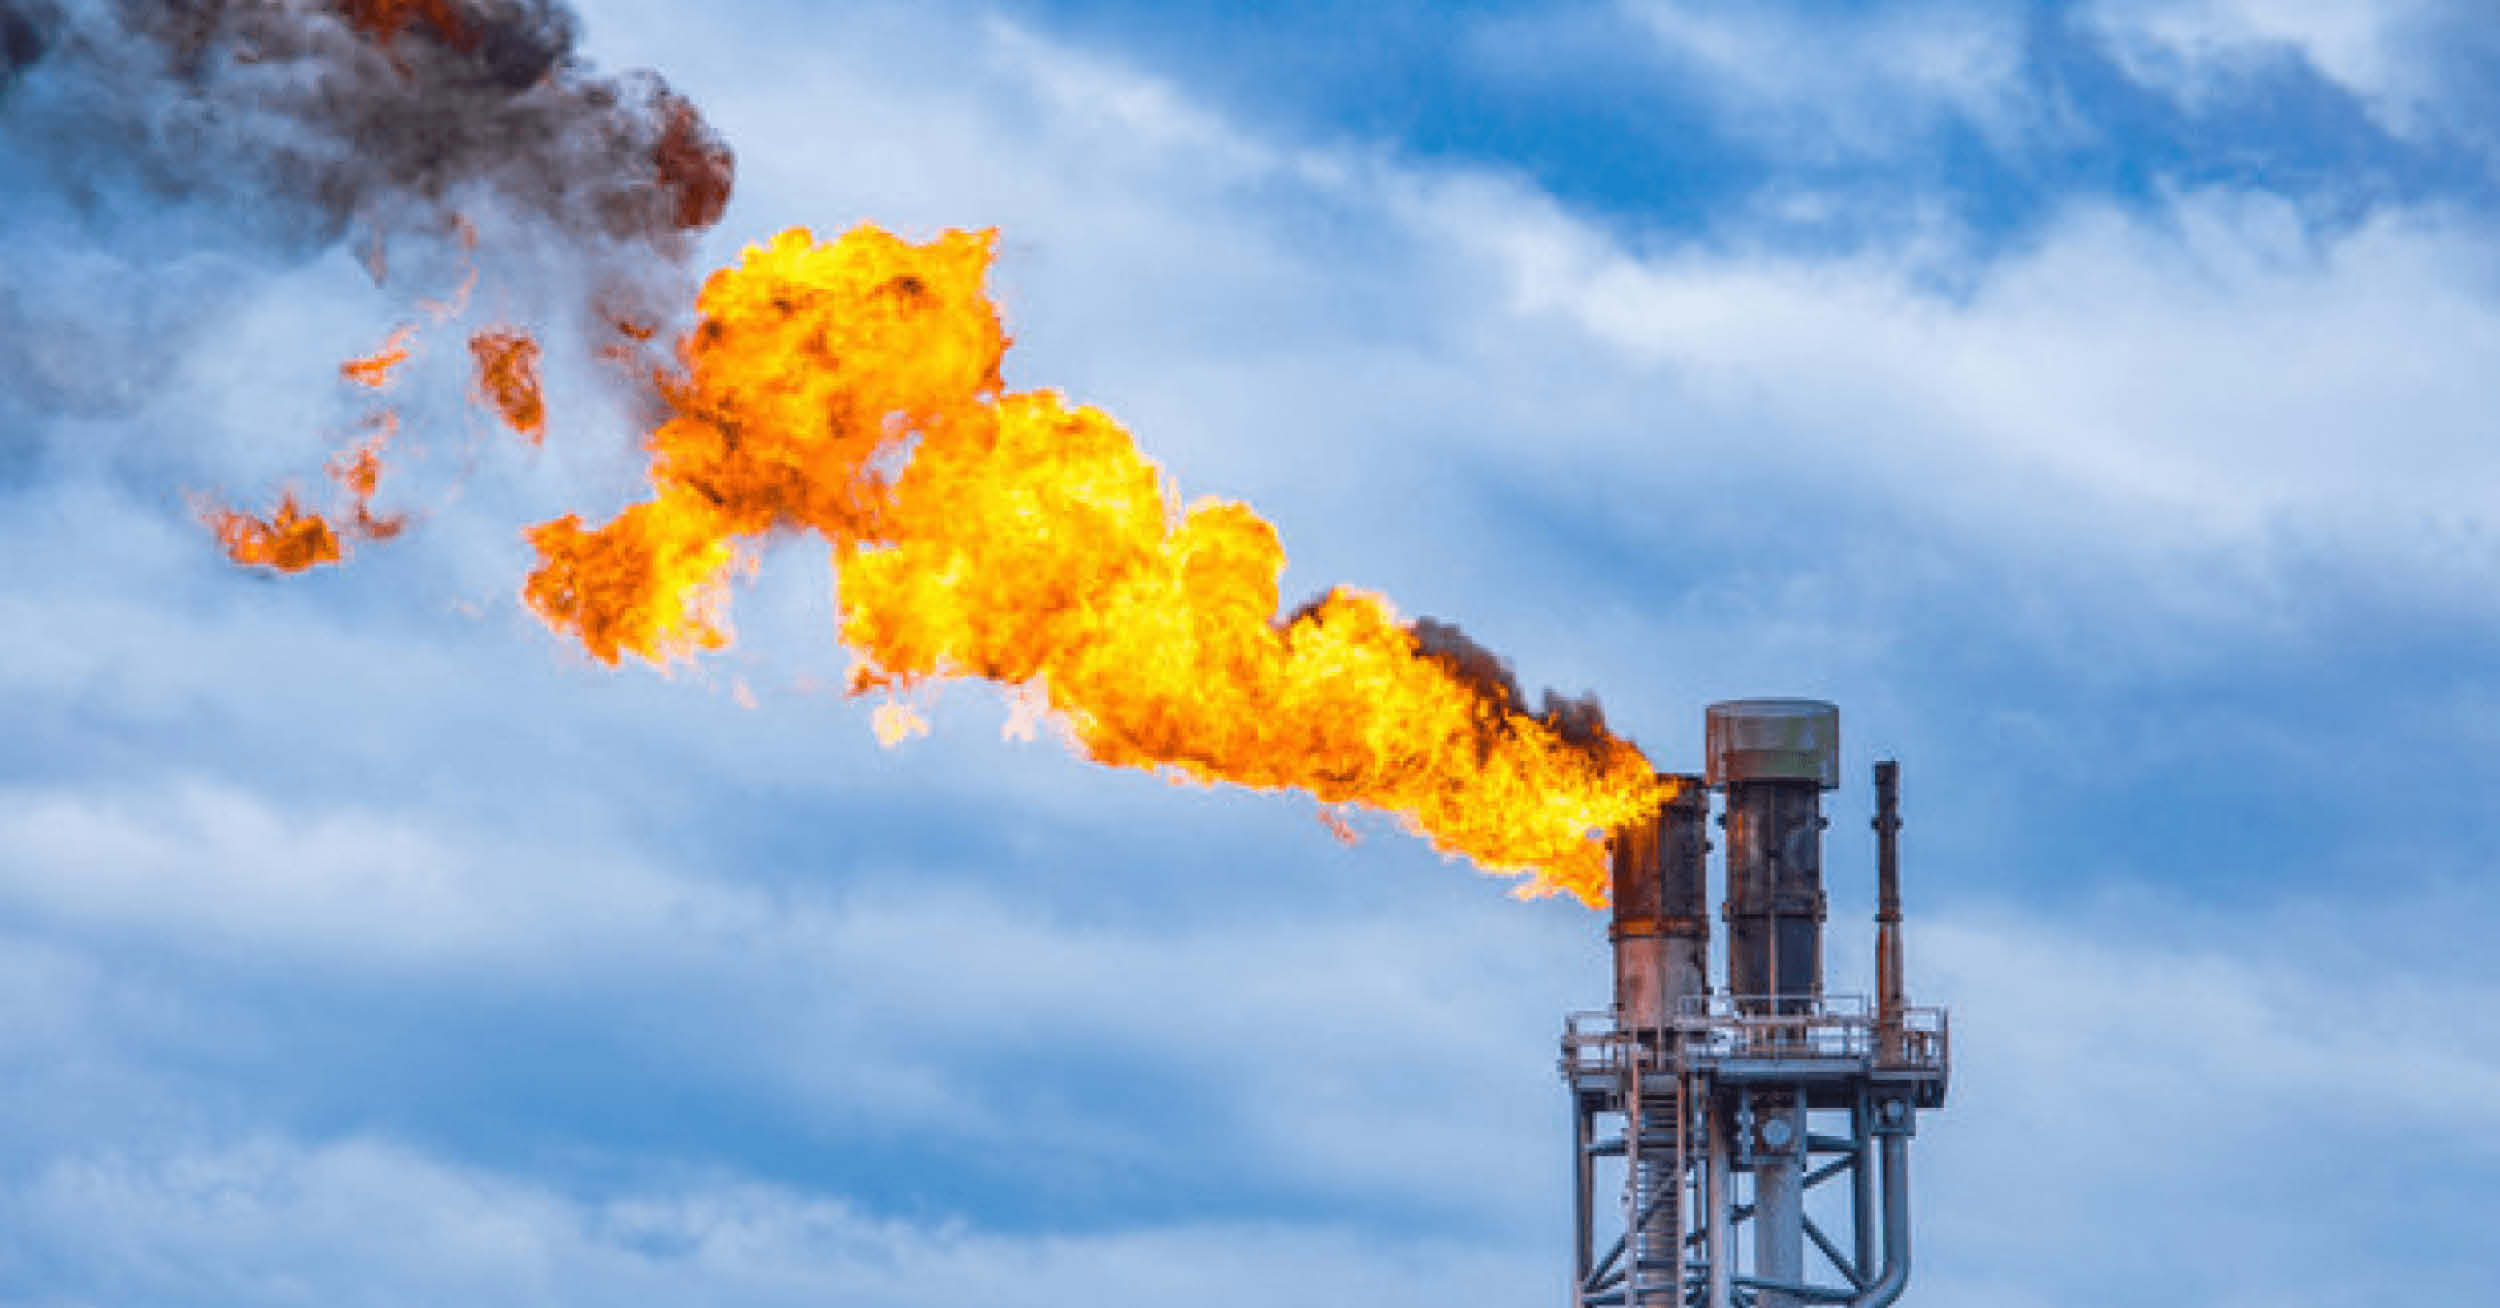 Nigeria’s Gas Flare Commercialization Program – Some Market Entry Considerations